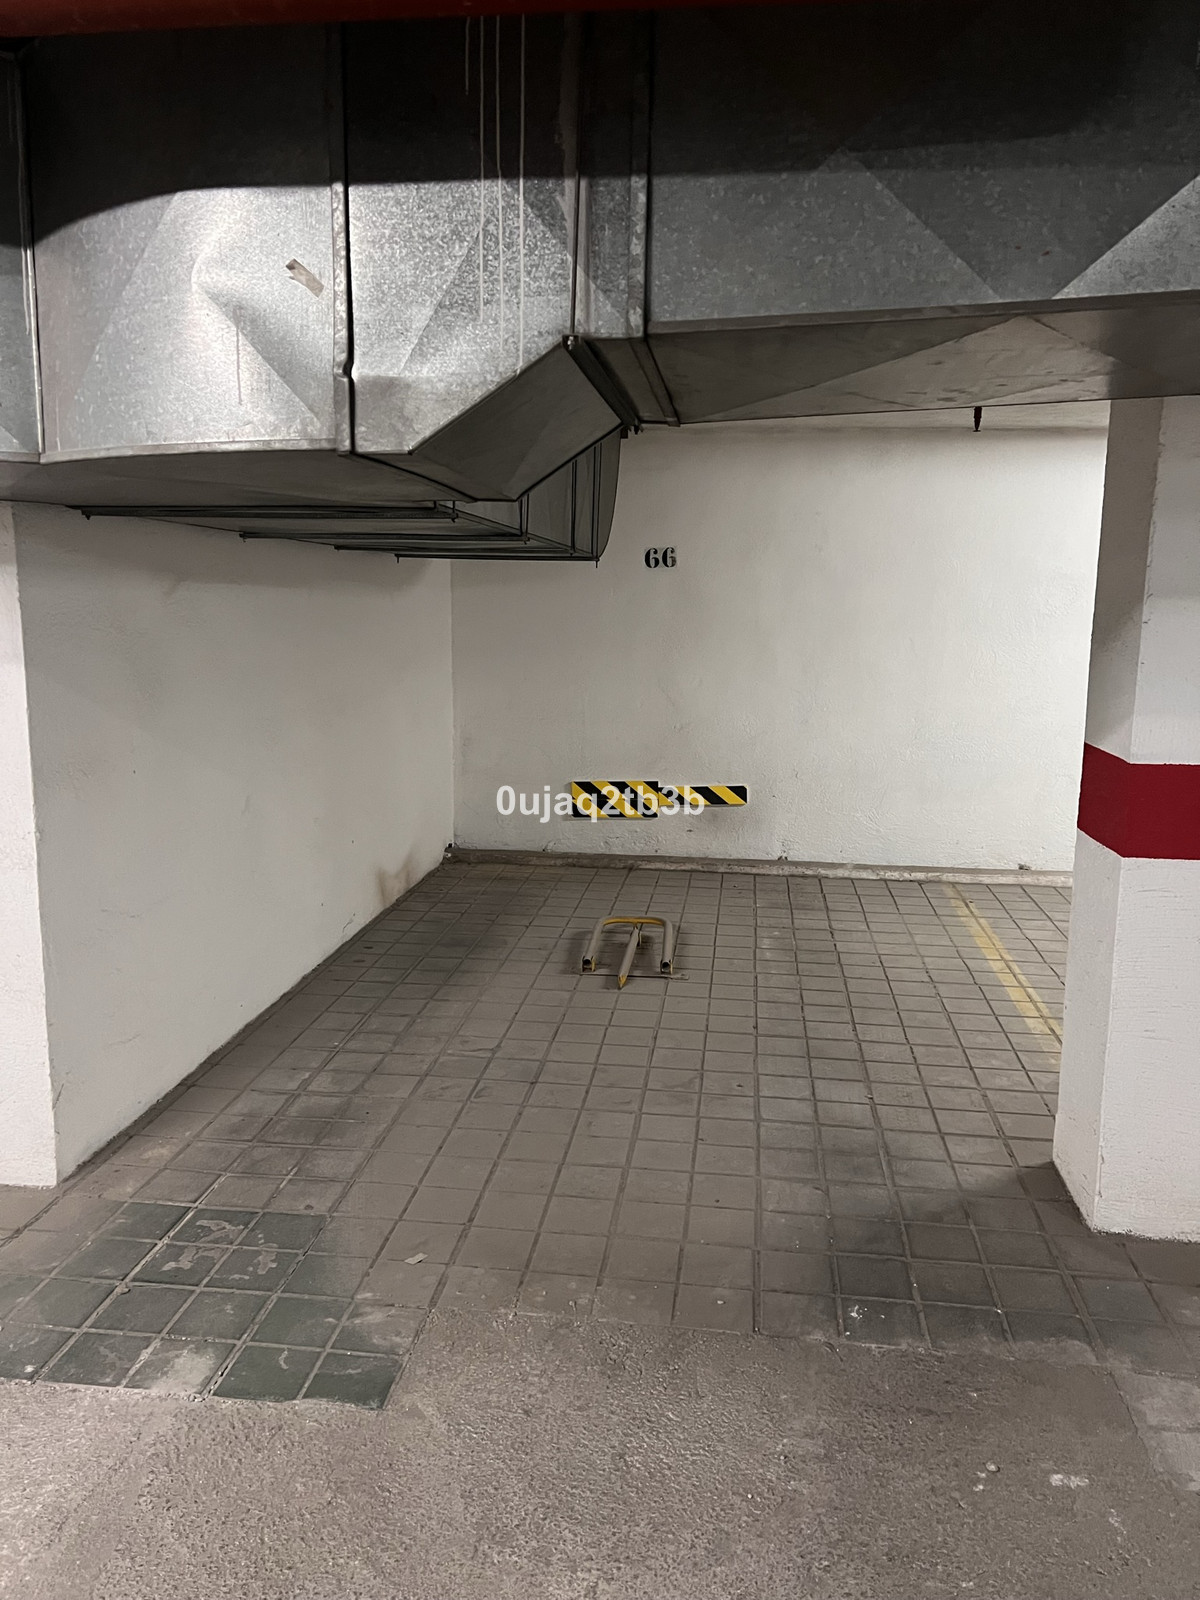 Parking Space For Sale Marbella